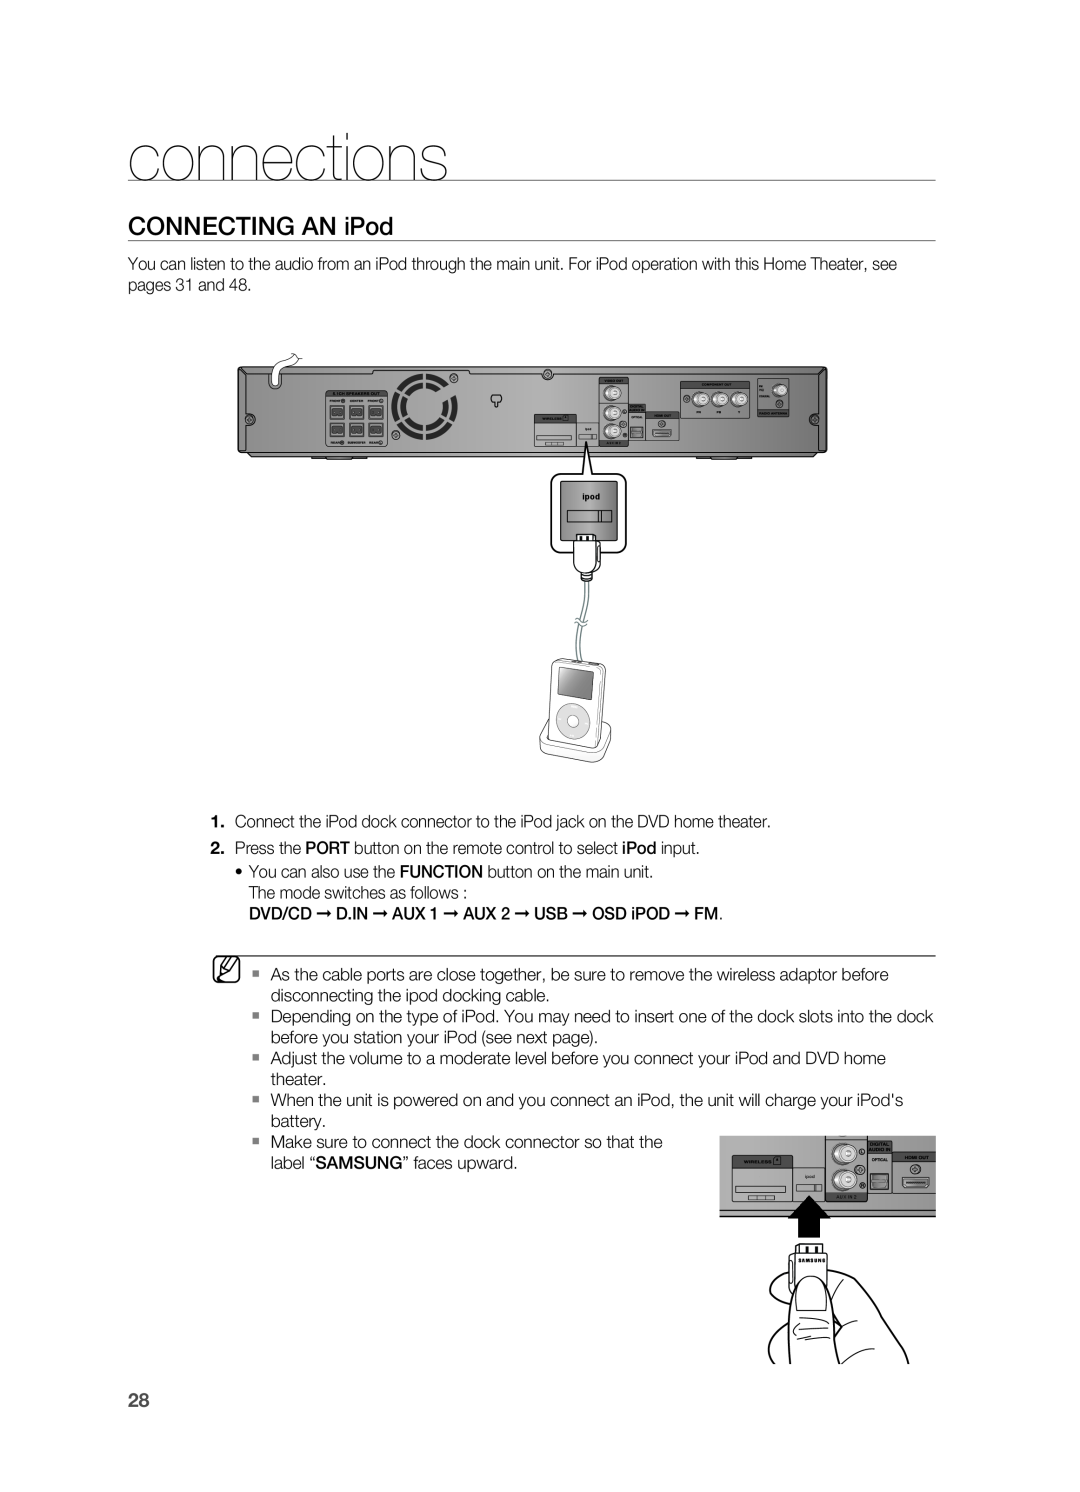 Samsung HT-TZ312 manual Connecting an iPod, connections 